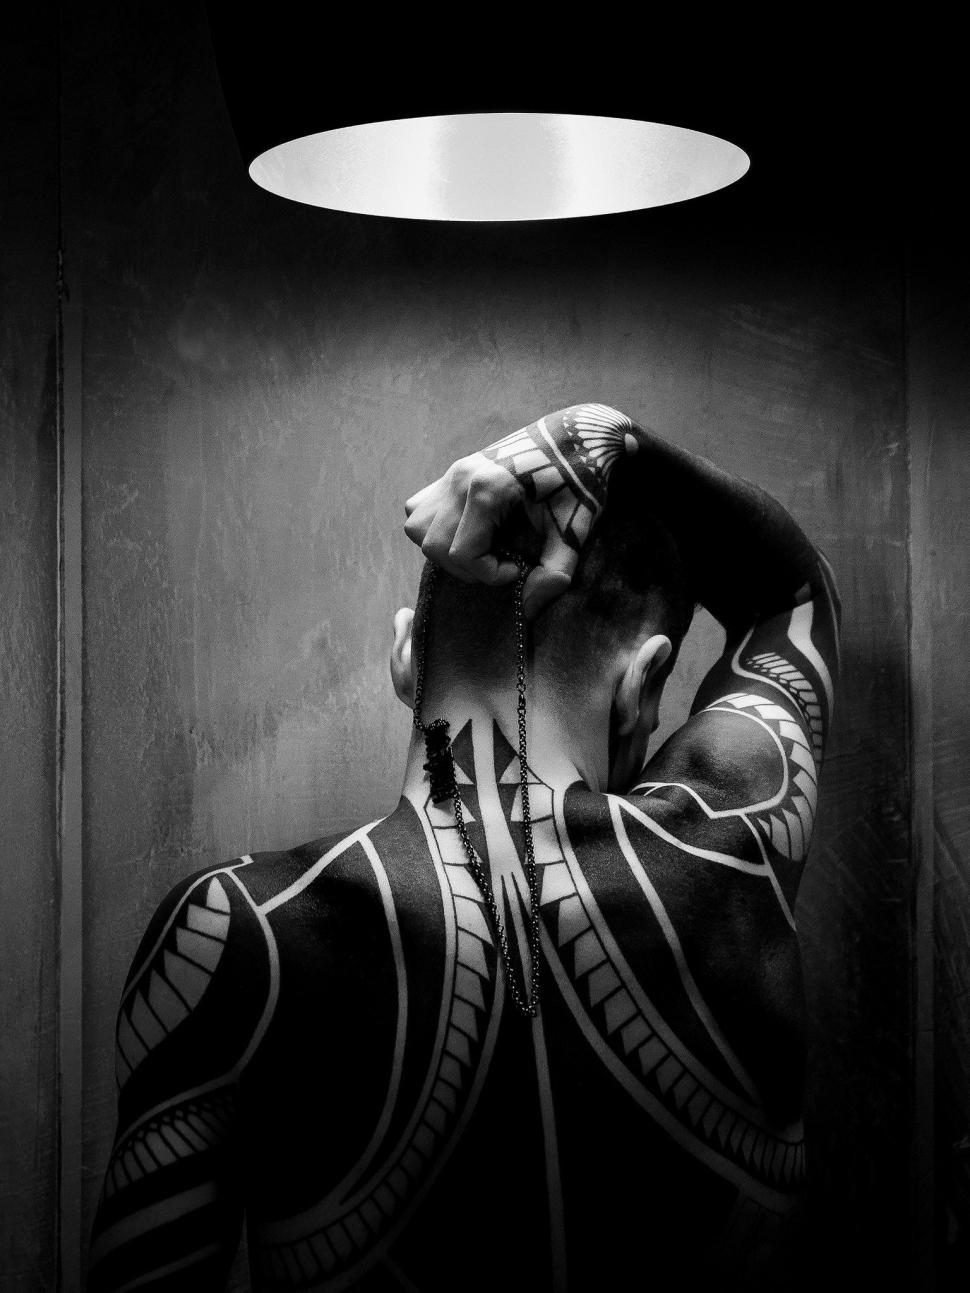 Free Image of Person Covering Face in Black and White 